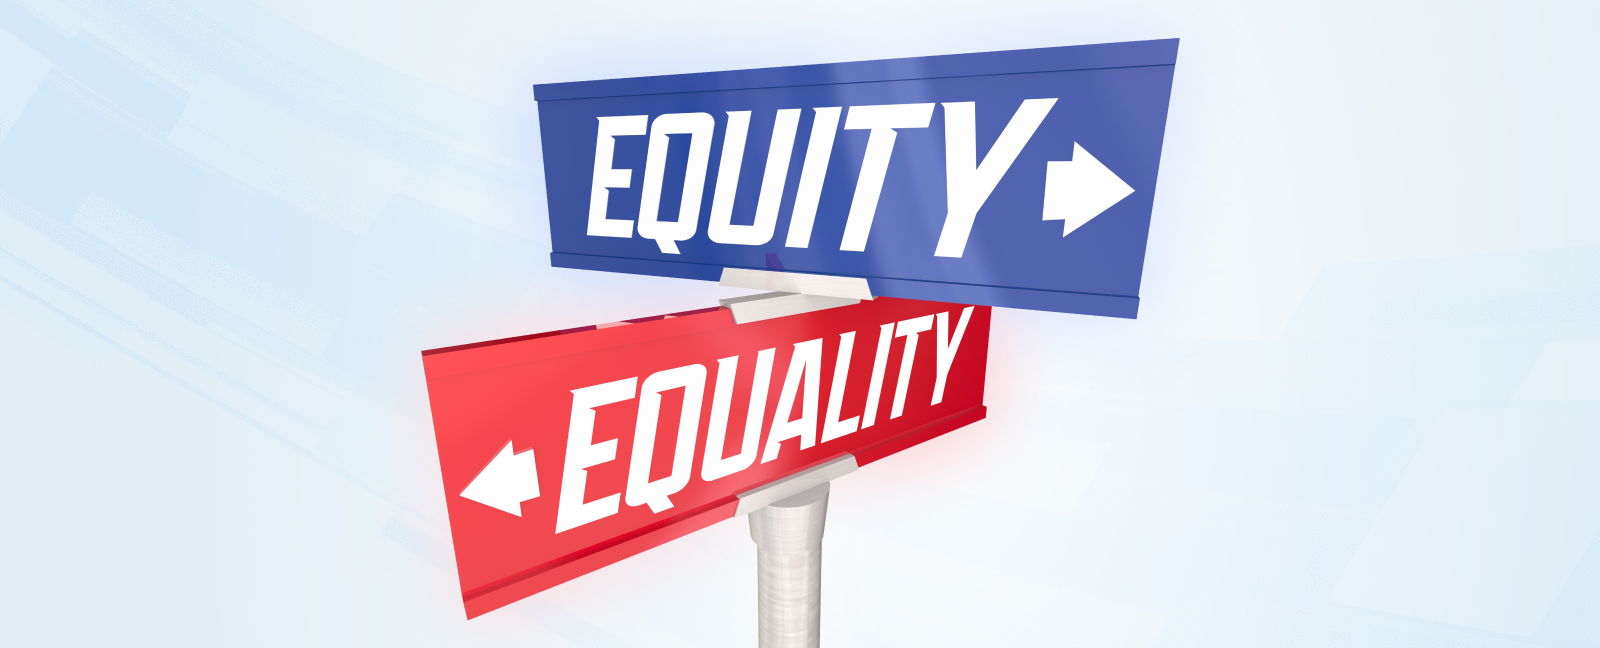 Equity Versus Equality: The Key to Creating a Just Society